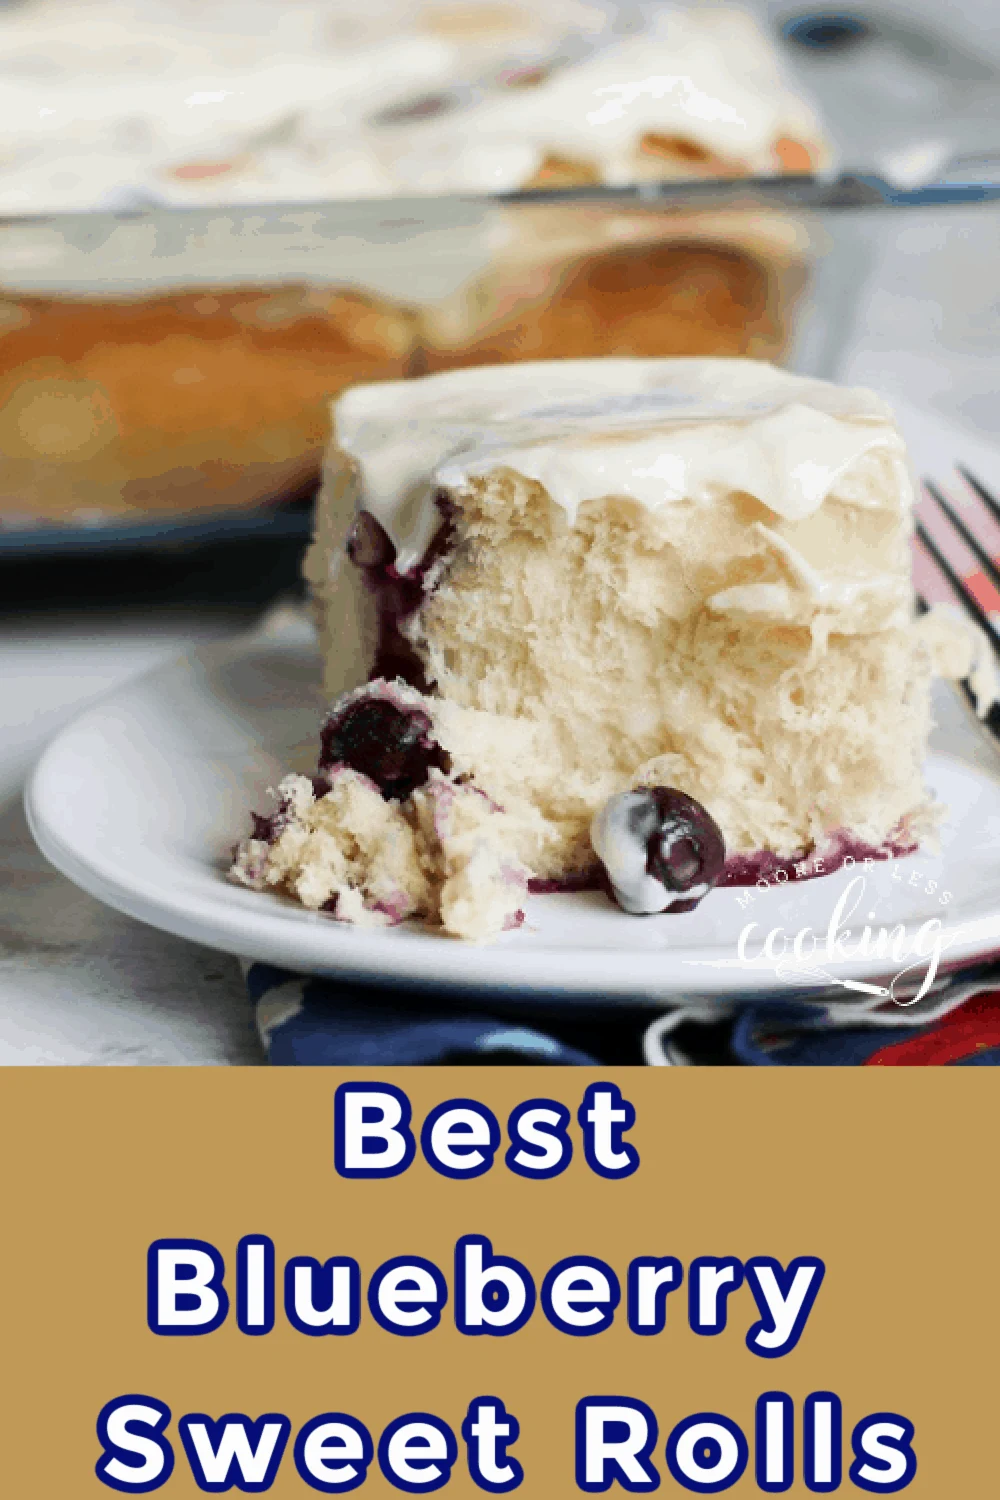 Best blueberry sweet rolls are soft sweet rolls that are bursting with blueberries and covered in cream cheese frosting. A perfect treat for breakfast, brunch, or dessert. via @Mooreorlesscook